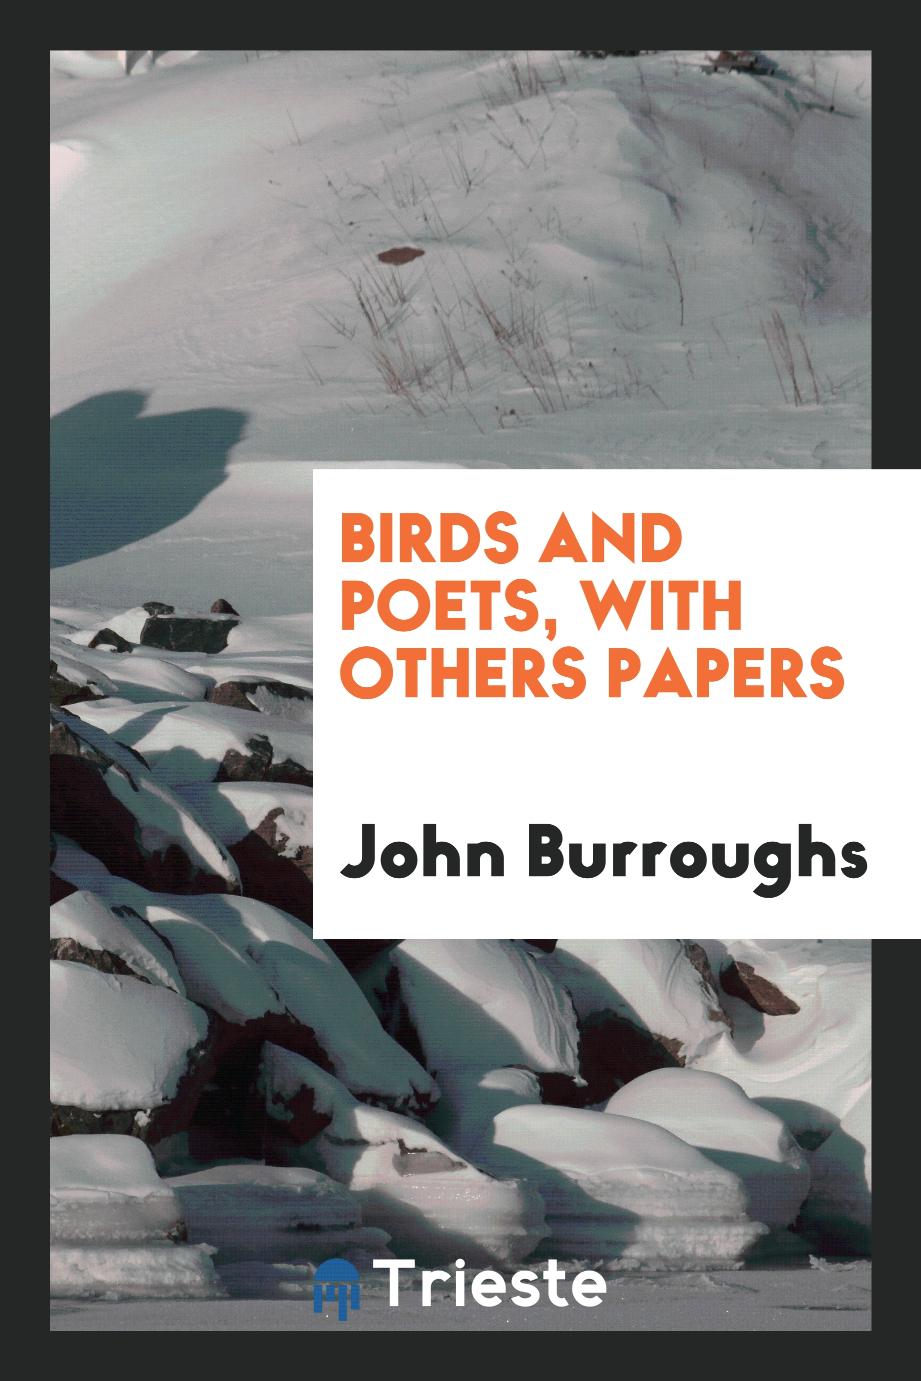 Birds and poets, with others papers